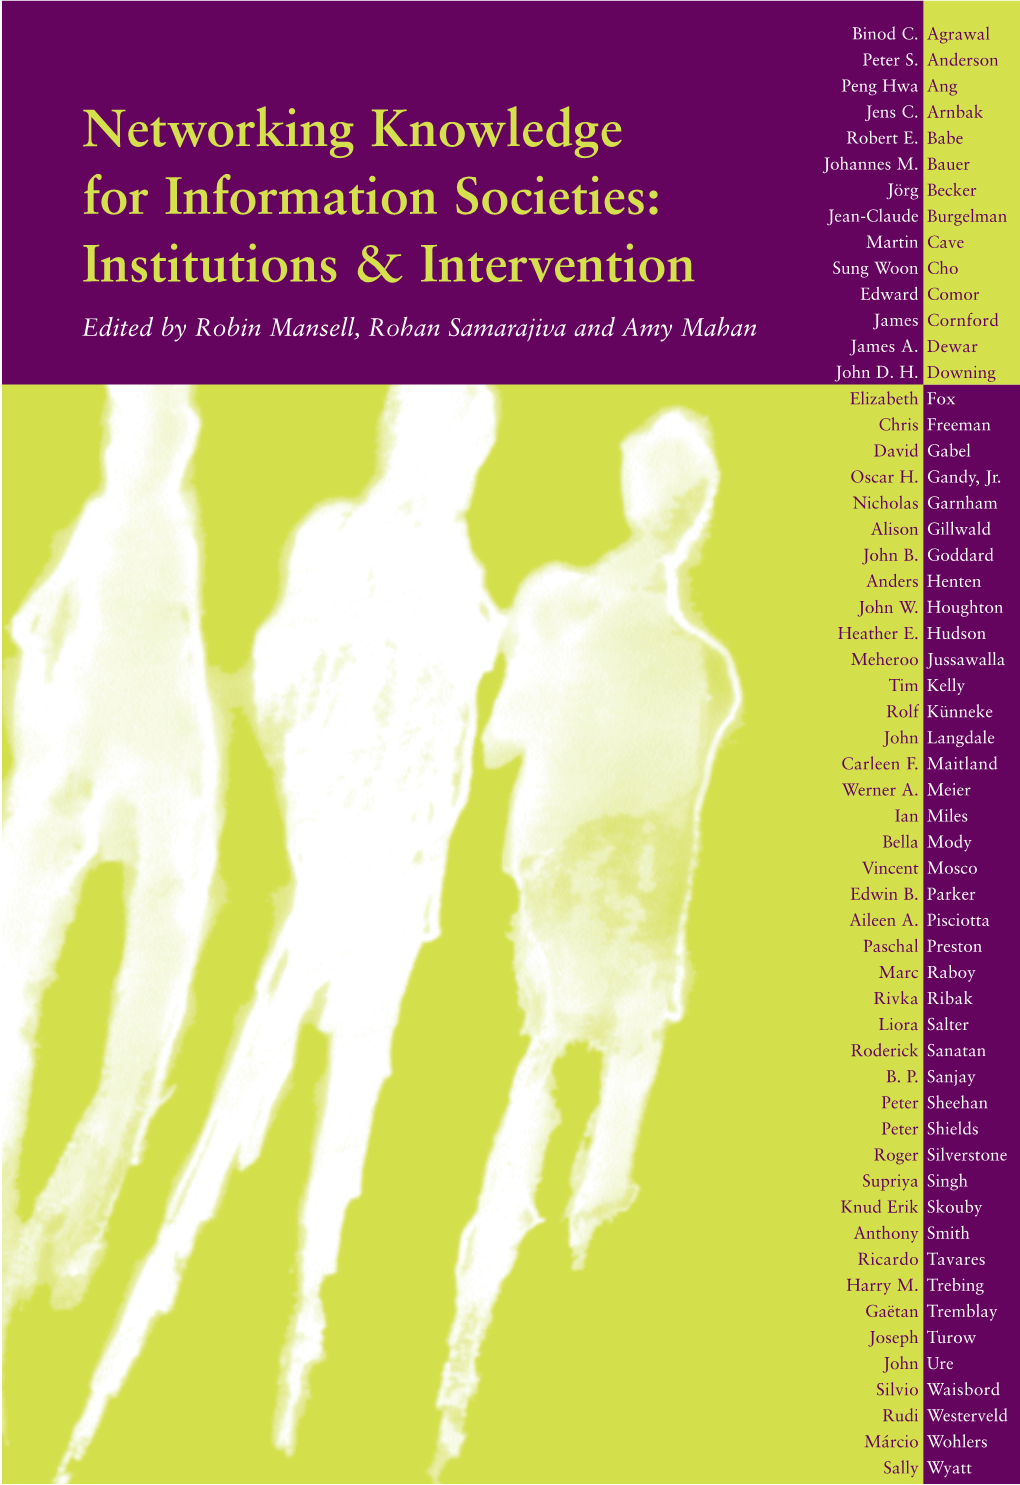 Networking Knowledge for Information Societies: Institutions & Intervention